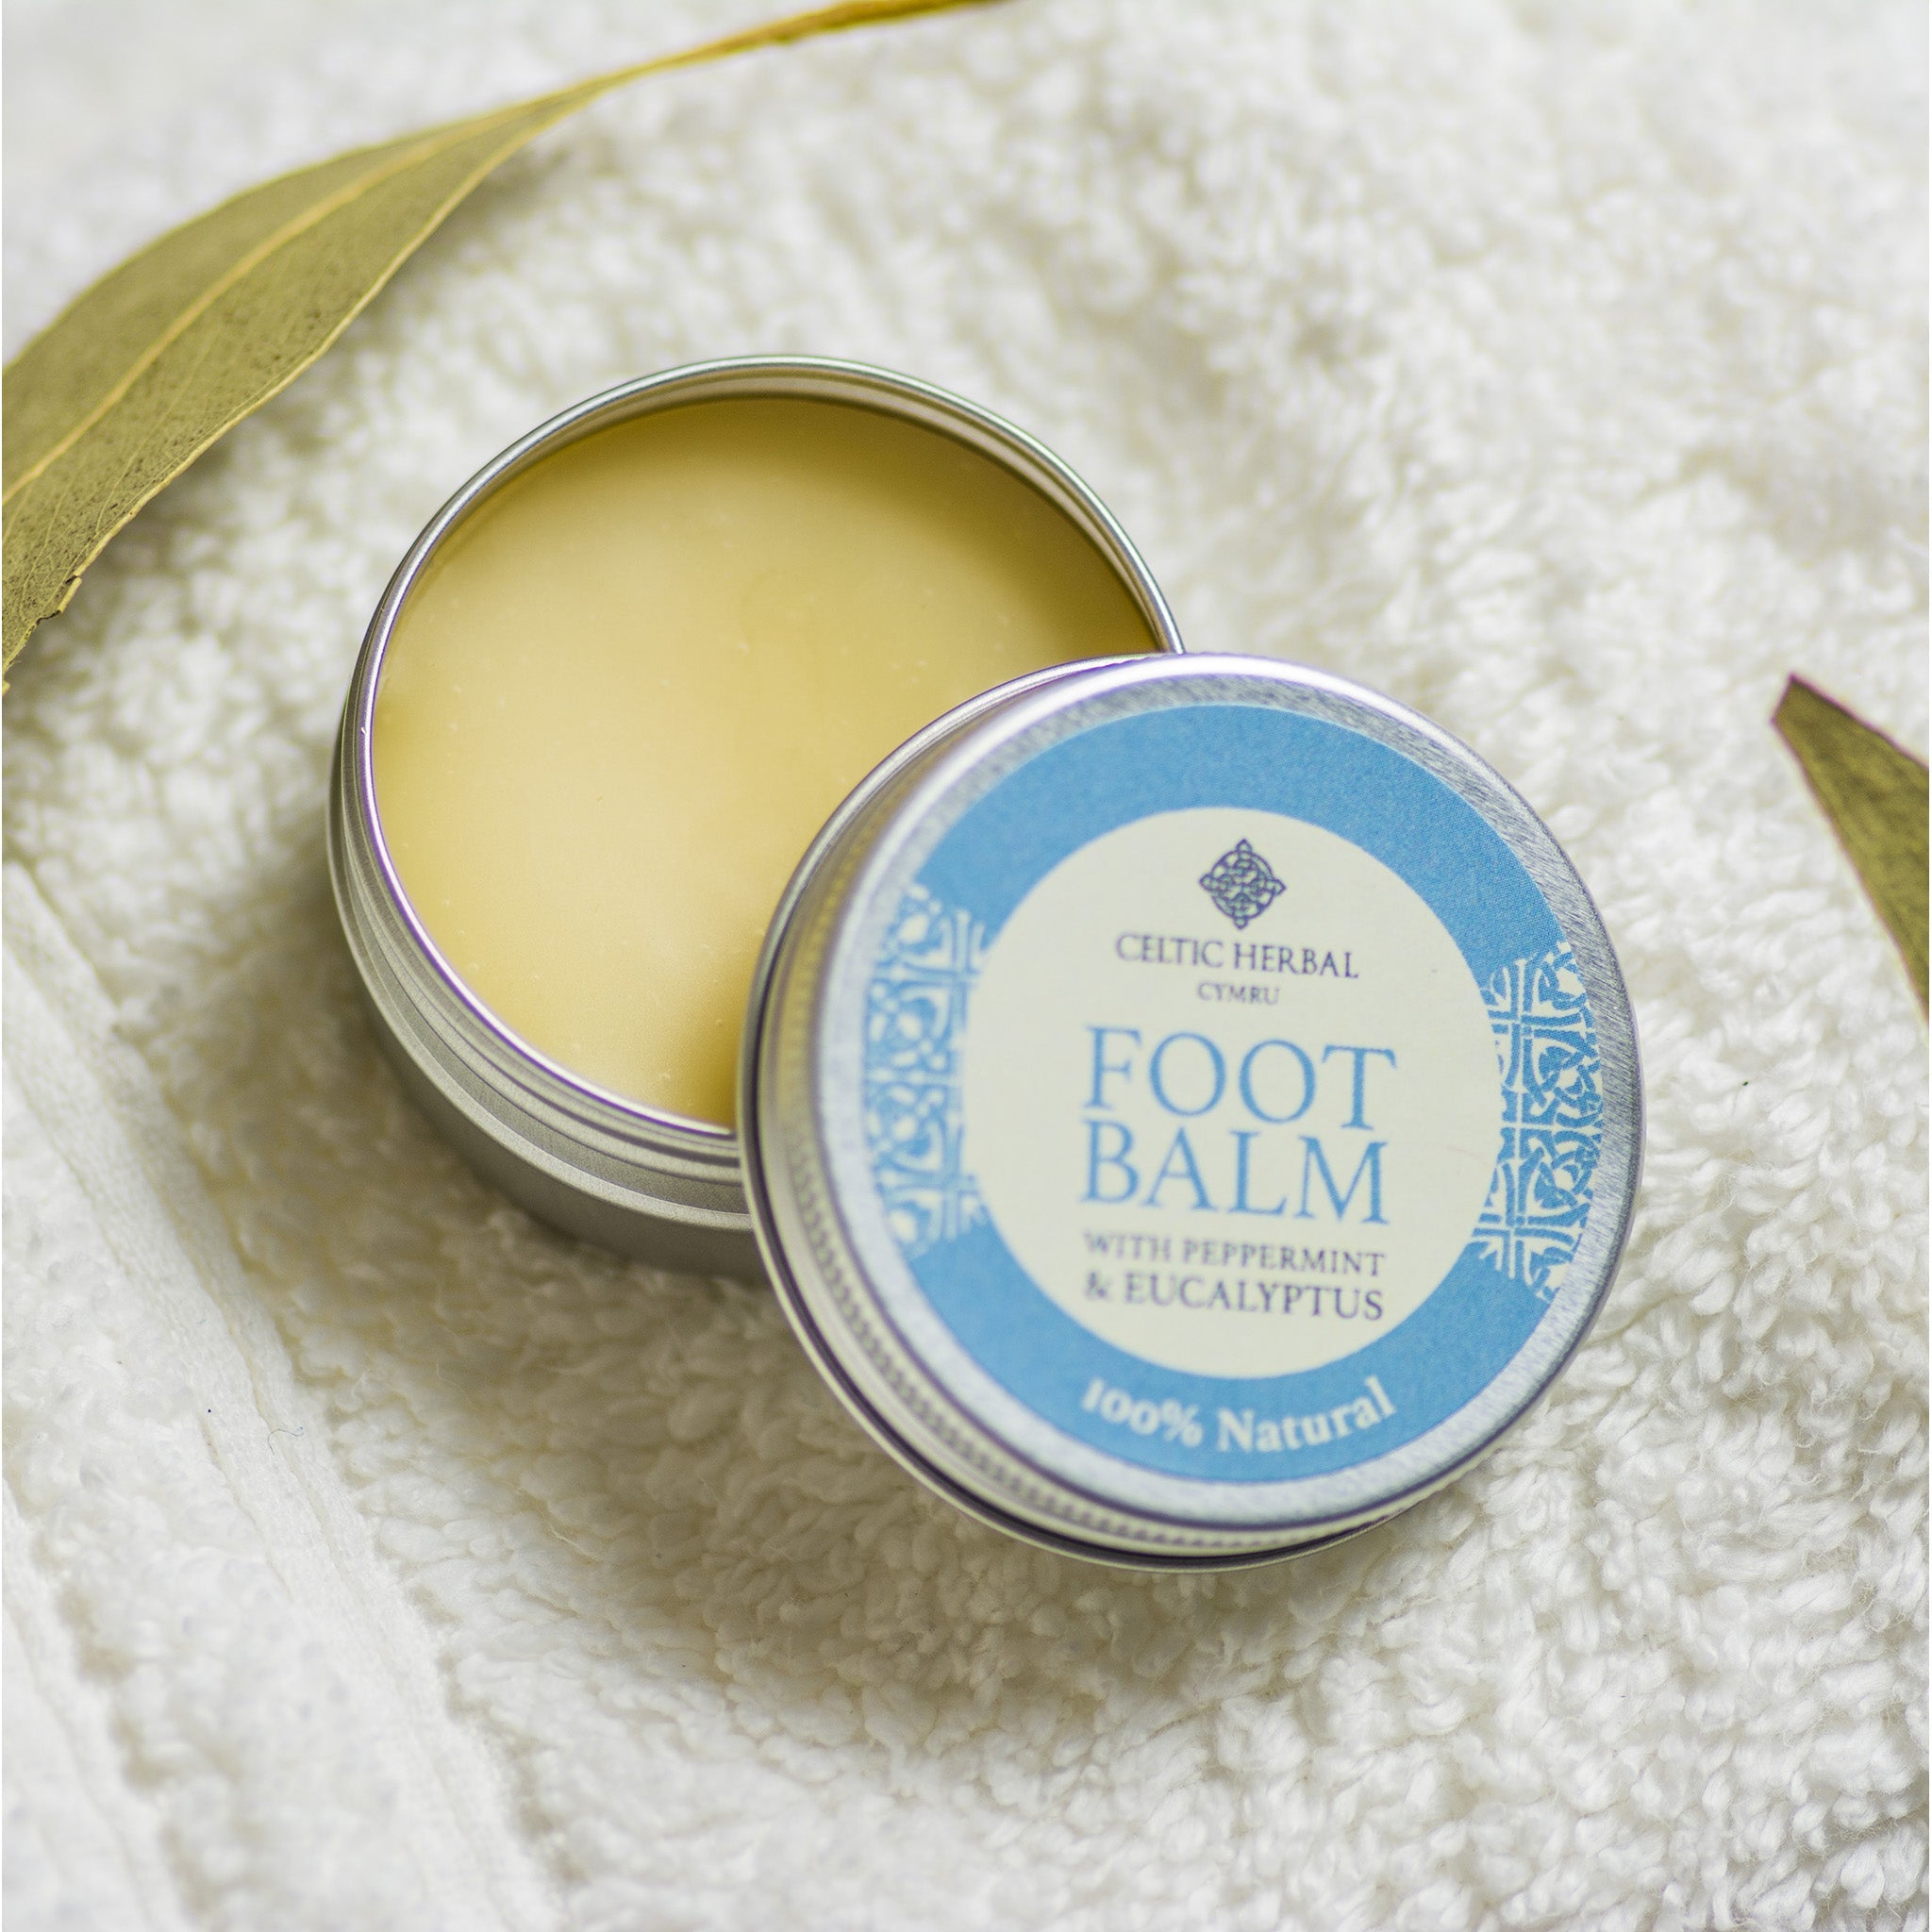 Foot Balm with Peppermint and Eucalyptus - mypure.co.uk